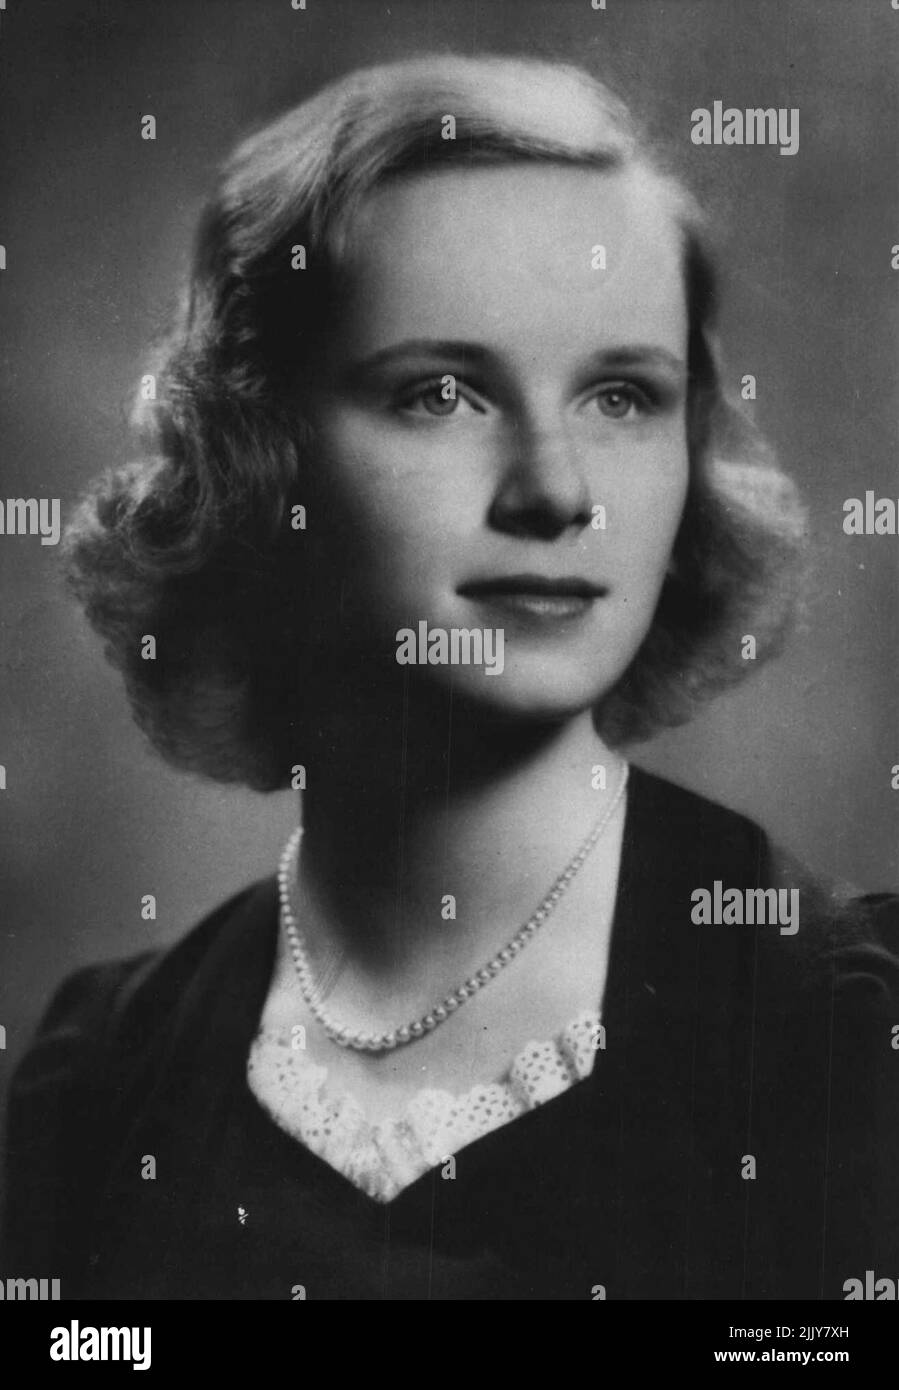 Suzanne Perrin, wife of Franklin D. Roosevelt, Jr. September 26, 1950. (Photo by Associated Press Newsphoto). Stock Photo